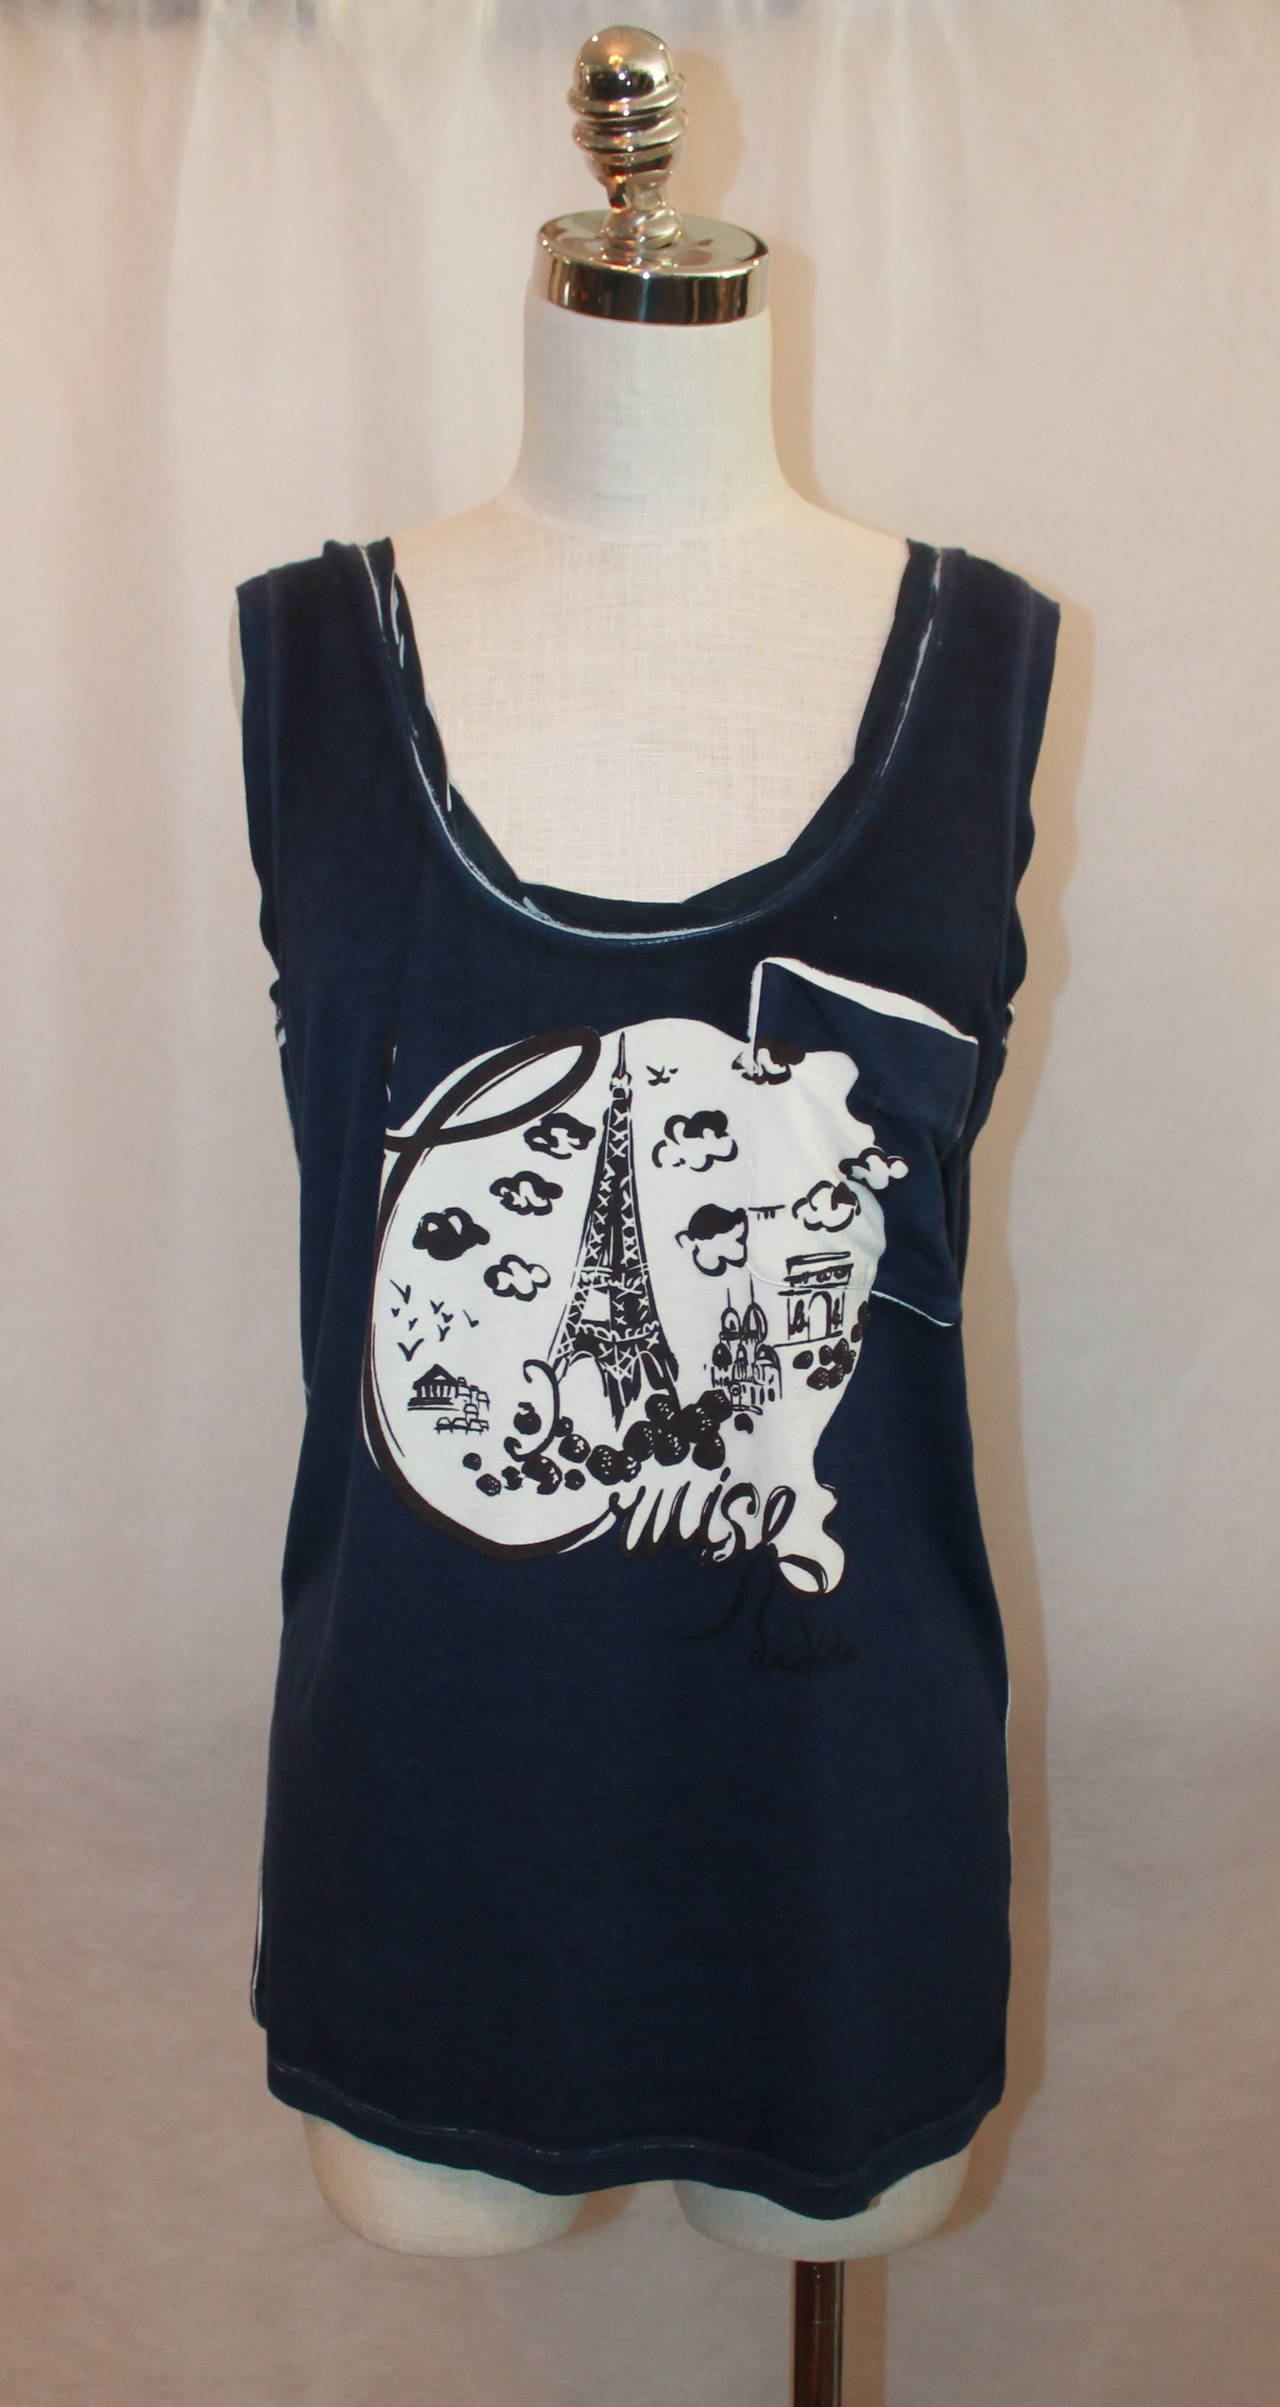 Louis Vuitton 2012 Resort Navy Paris Motif Tank with Pocket - M. This tank is in good condition with light wear. It is 88% viscose and 12% silk. It has a loose fit and has Parisian icons on it with a 